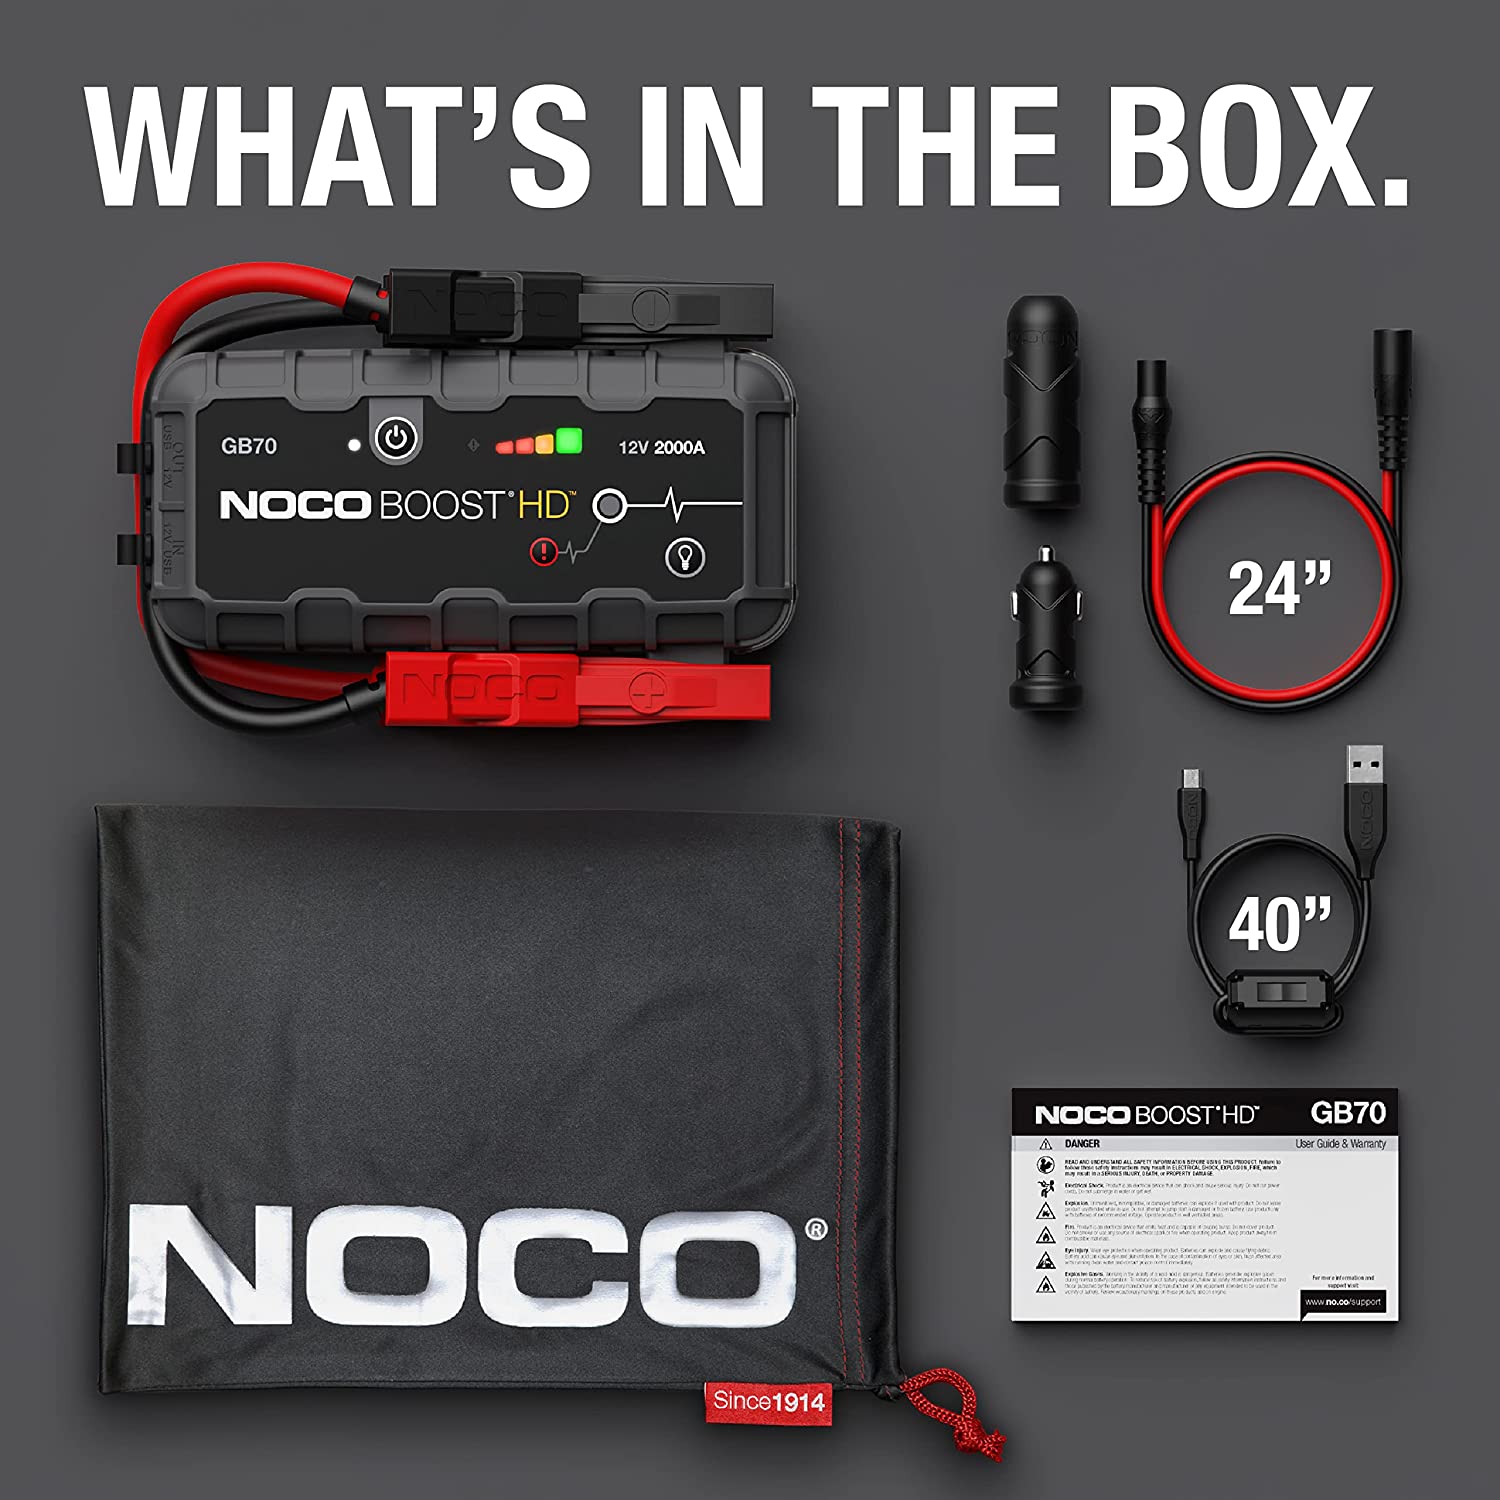 NOCO Boost HD GB70 2000 Amp 12-Volt UltraSafe Lithium Jump Starter Box, Car  Battery Booster Pack, Portable Power Bank Charger, and Jumper Cables for up  to 8-Liter Gasoline and 6-Liter Diesel Engines